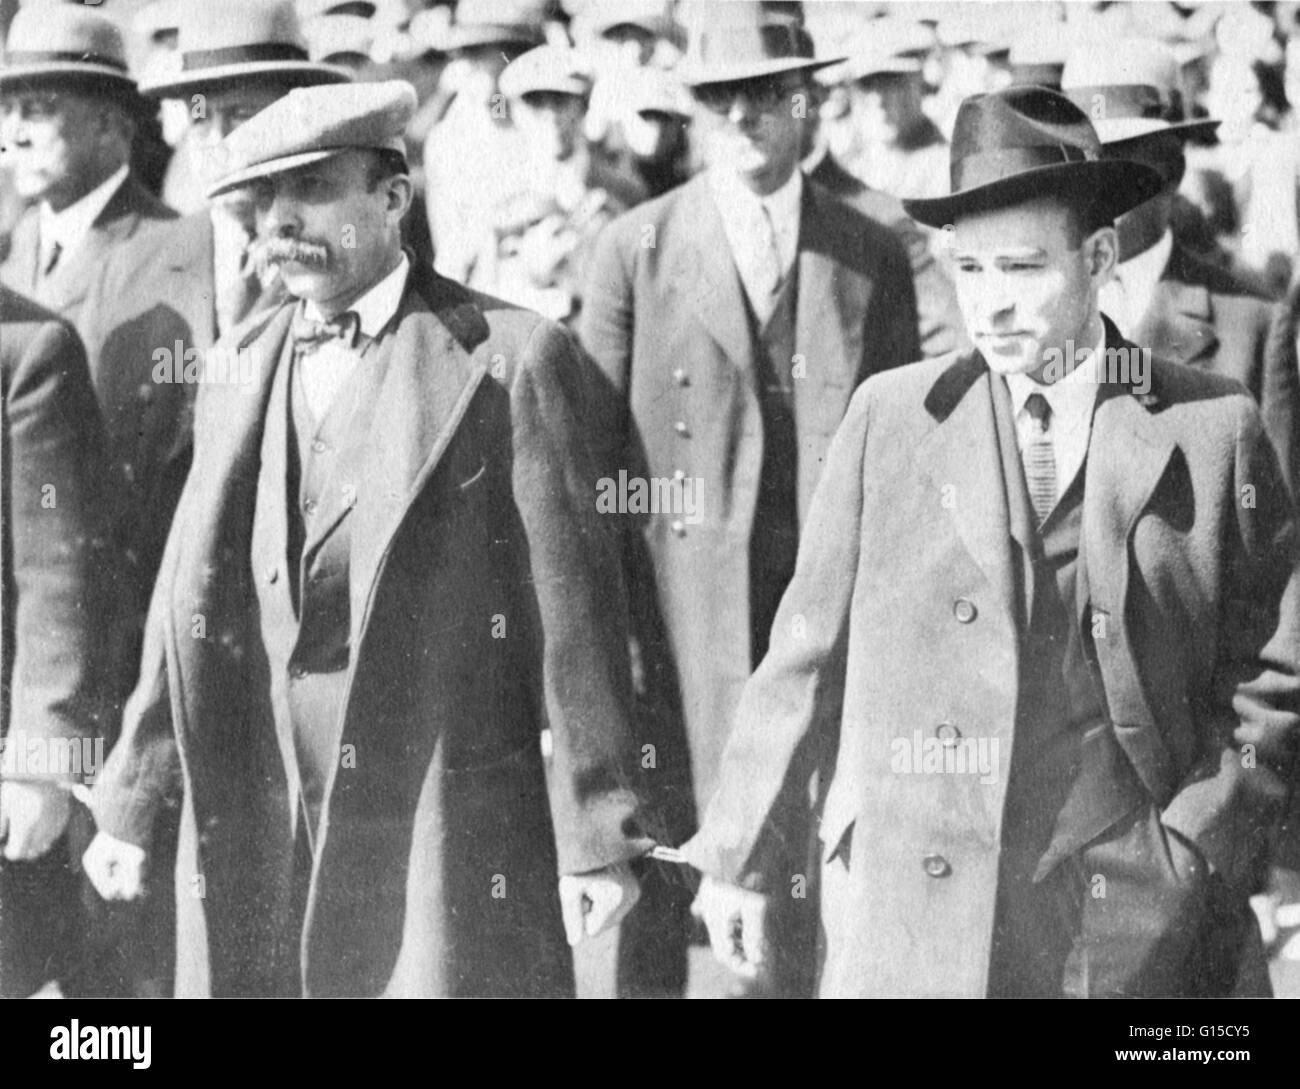 Ferdinando Nicola Sacco and Bartolomeo Vanzetti were two Italian-born laborers and anarchists who were convicted of the 1920 armed robbery and murder of a pay-clerk and a security guard in South Braintree, Massachusetts. They were electrocuted on August 2 Stock Photo